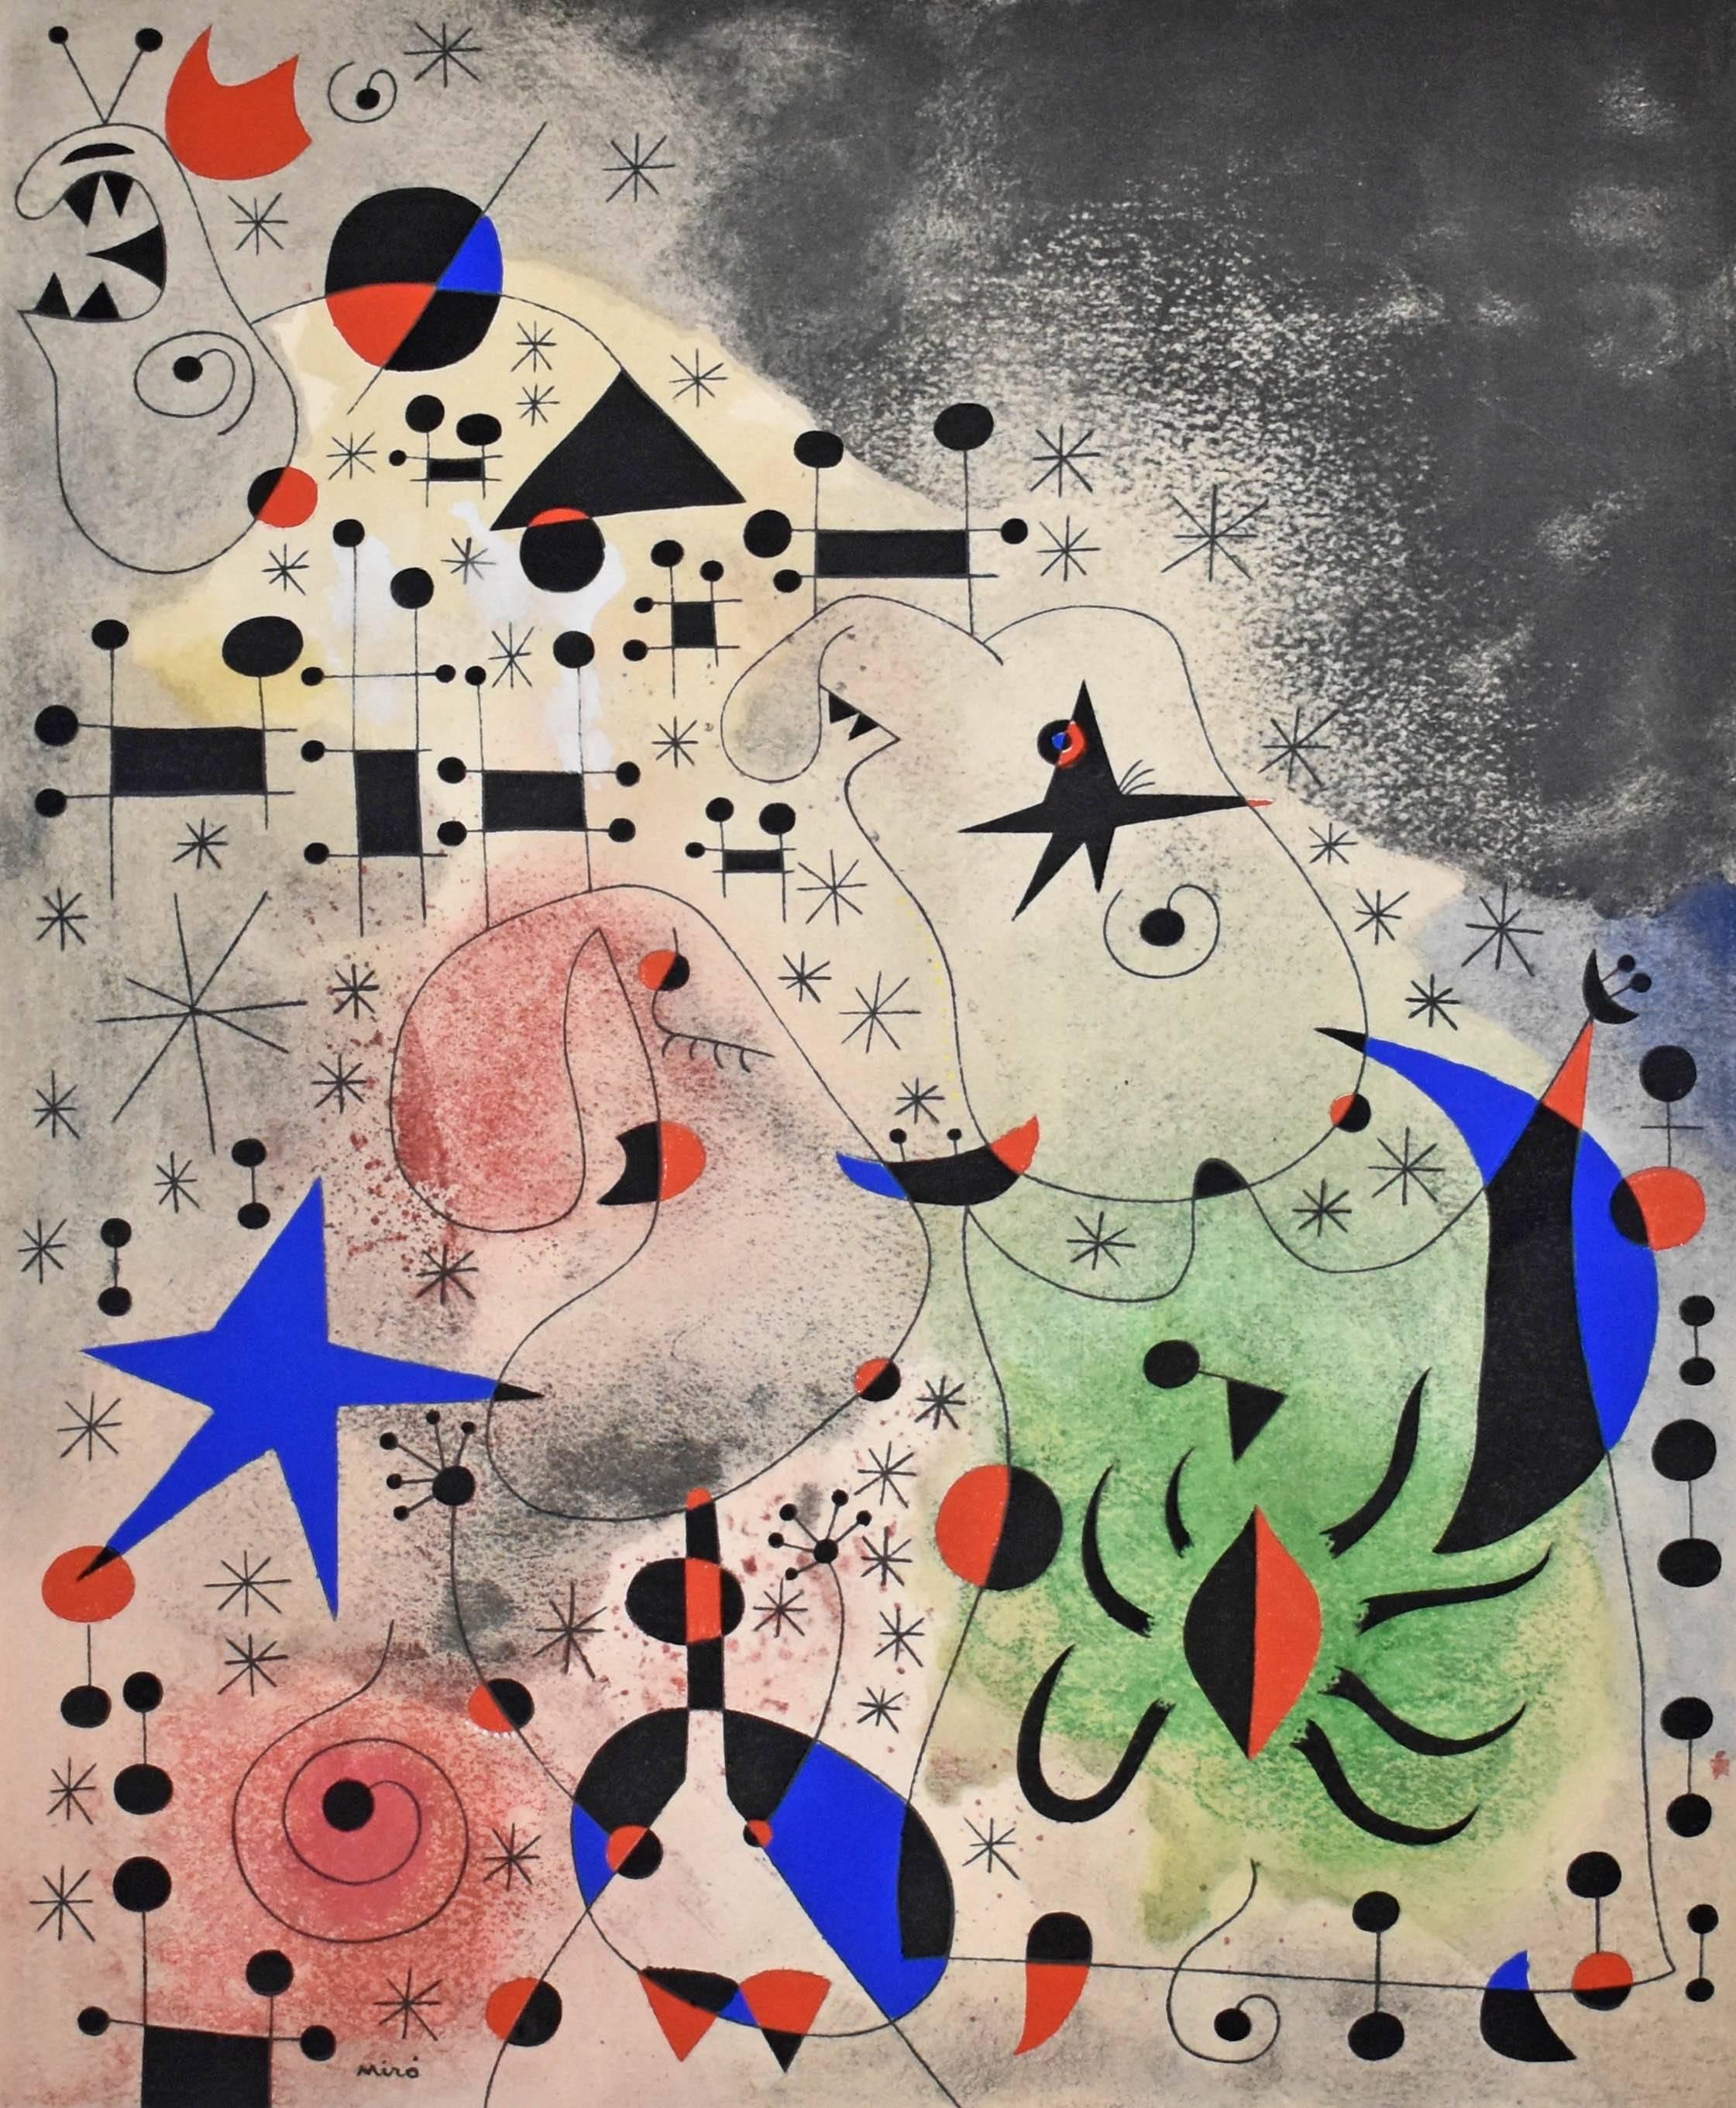 (after) Joan Miró Abstract Print - L'oiseau migrateur (The Migratory Bird), Plate XVIII, from Constellations